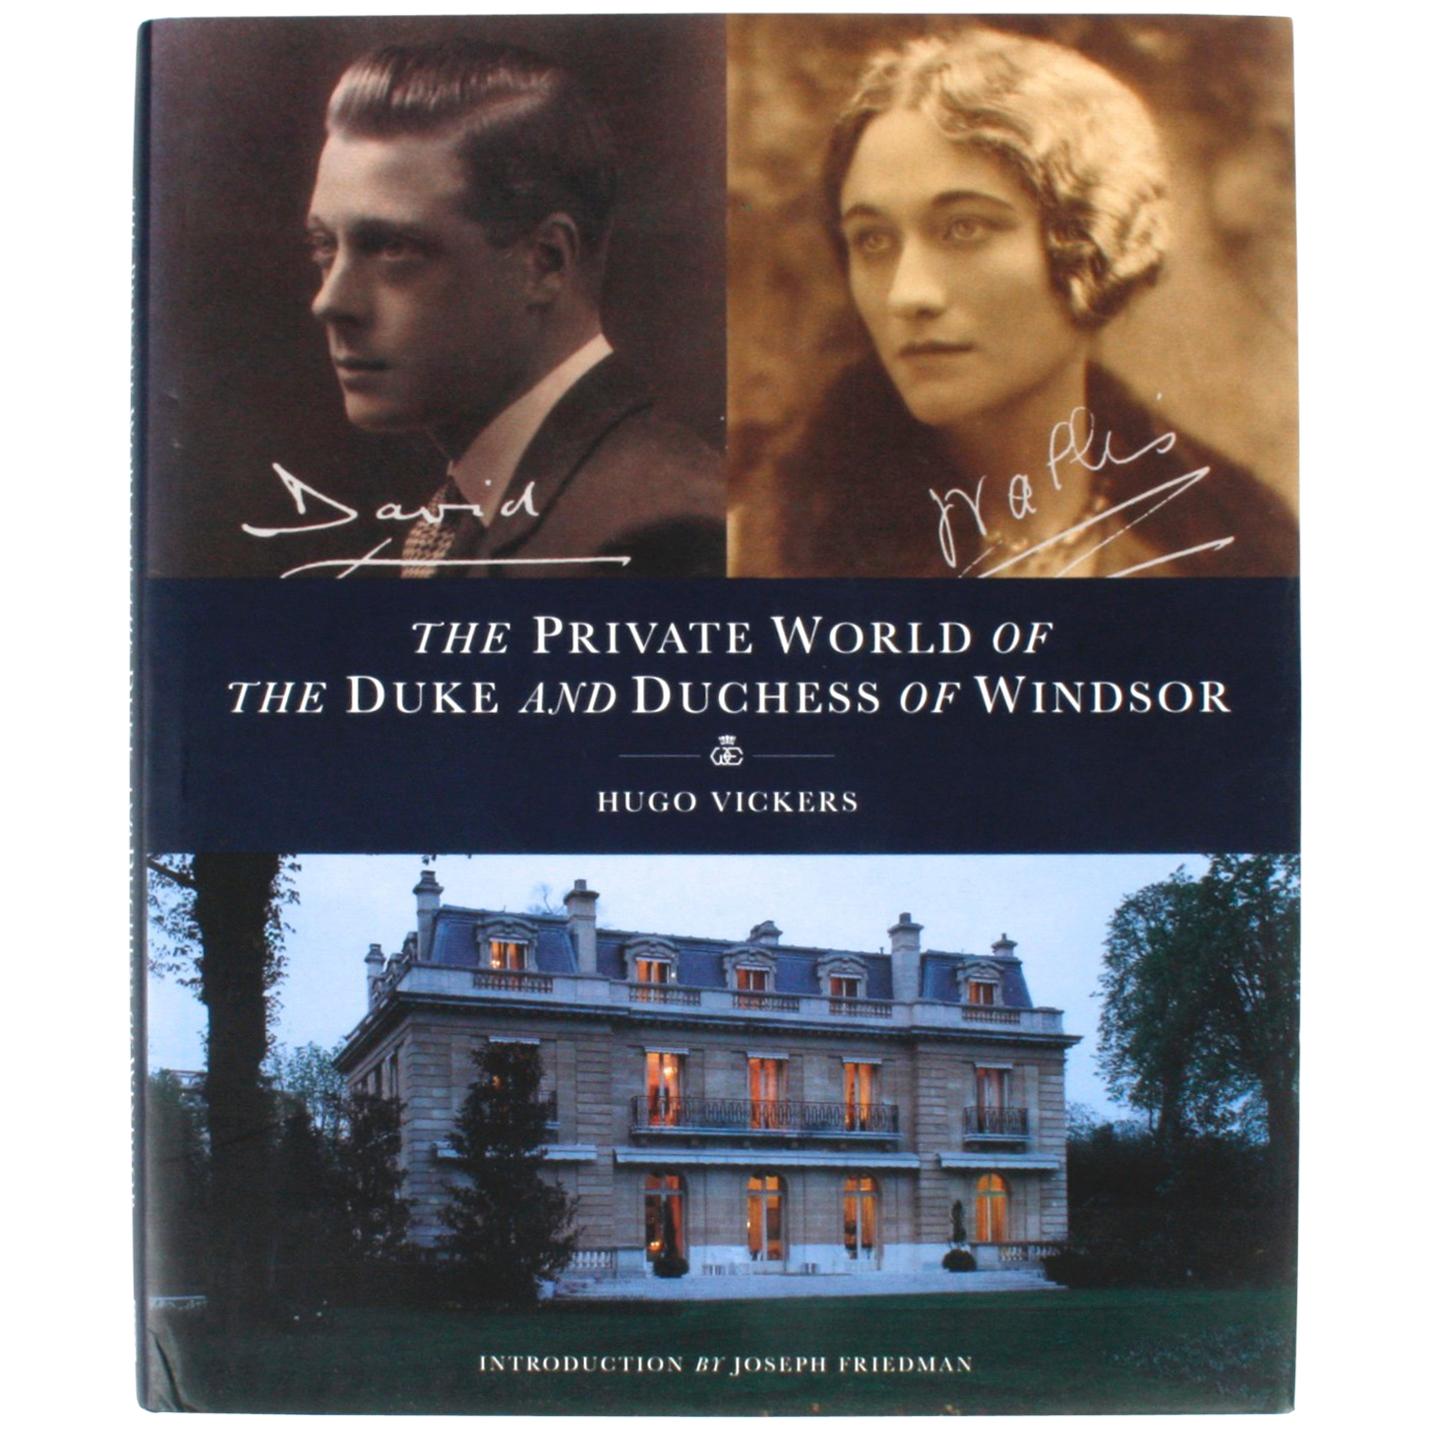 Private World of The Duke and Duchess of Windsor by Hugo Vickers, 1st Ed